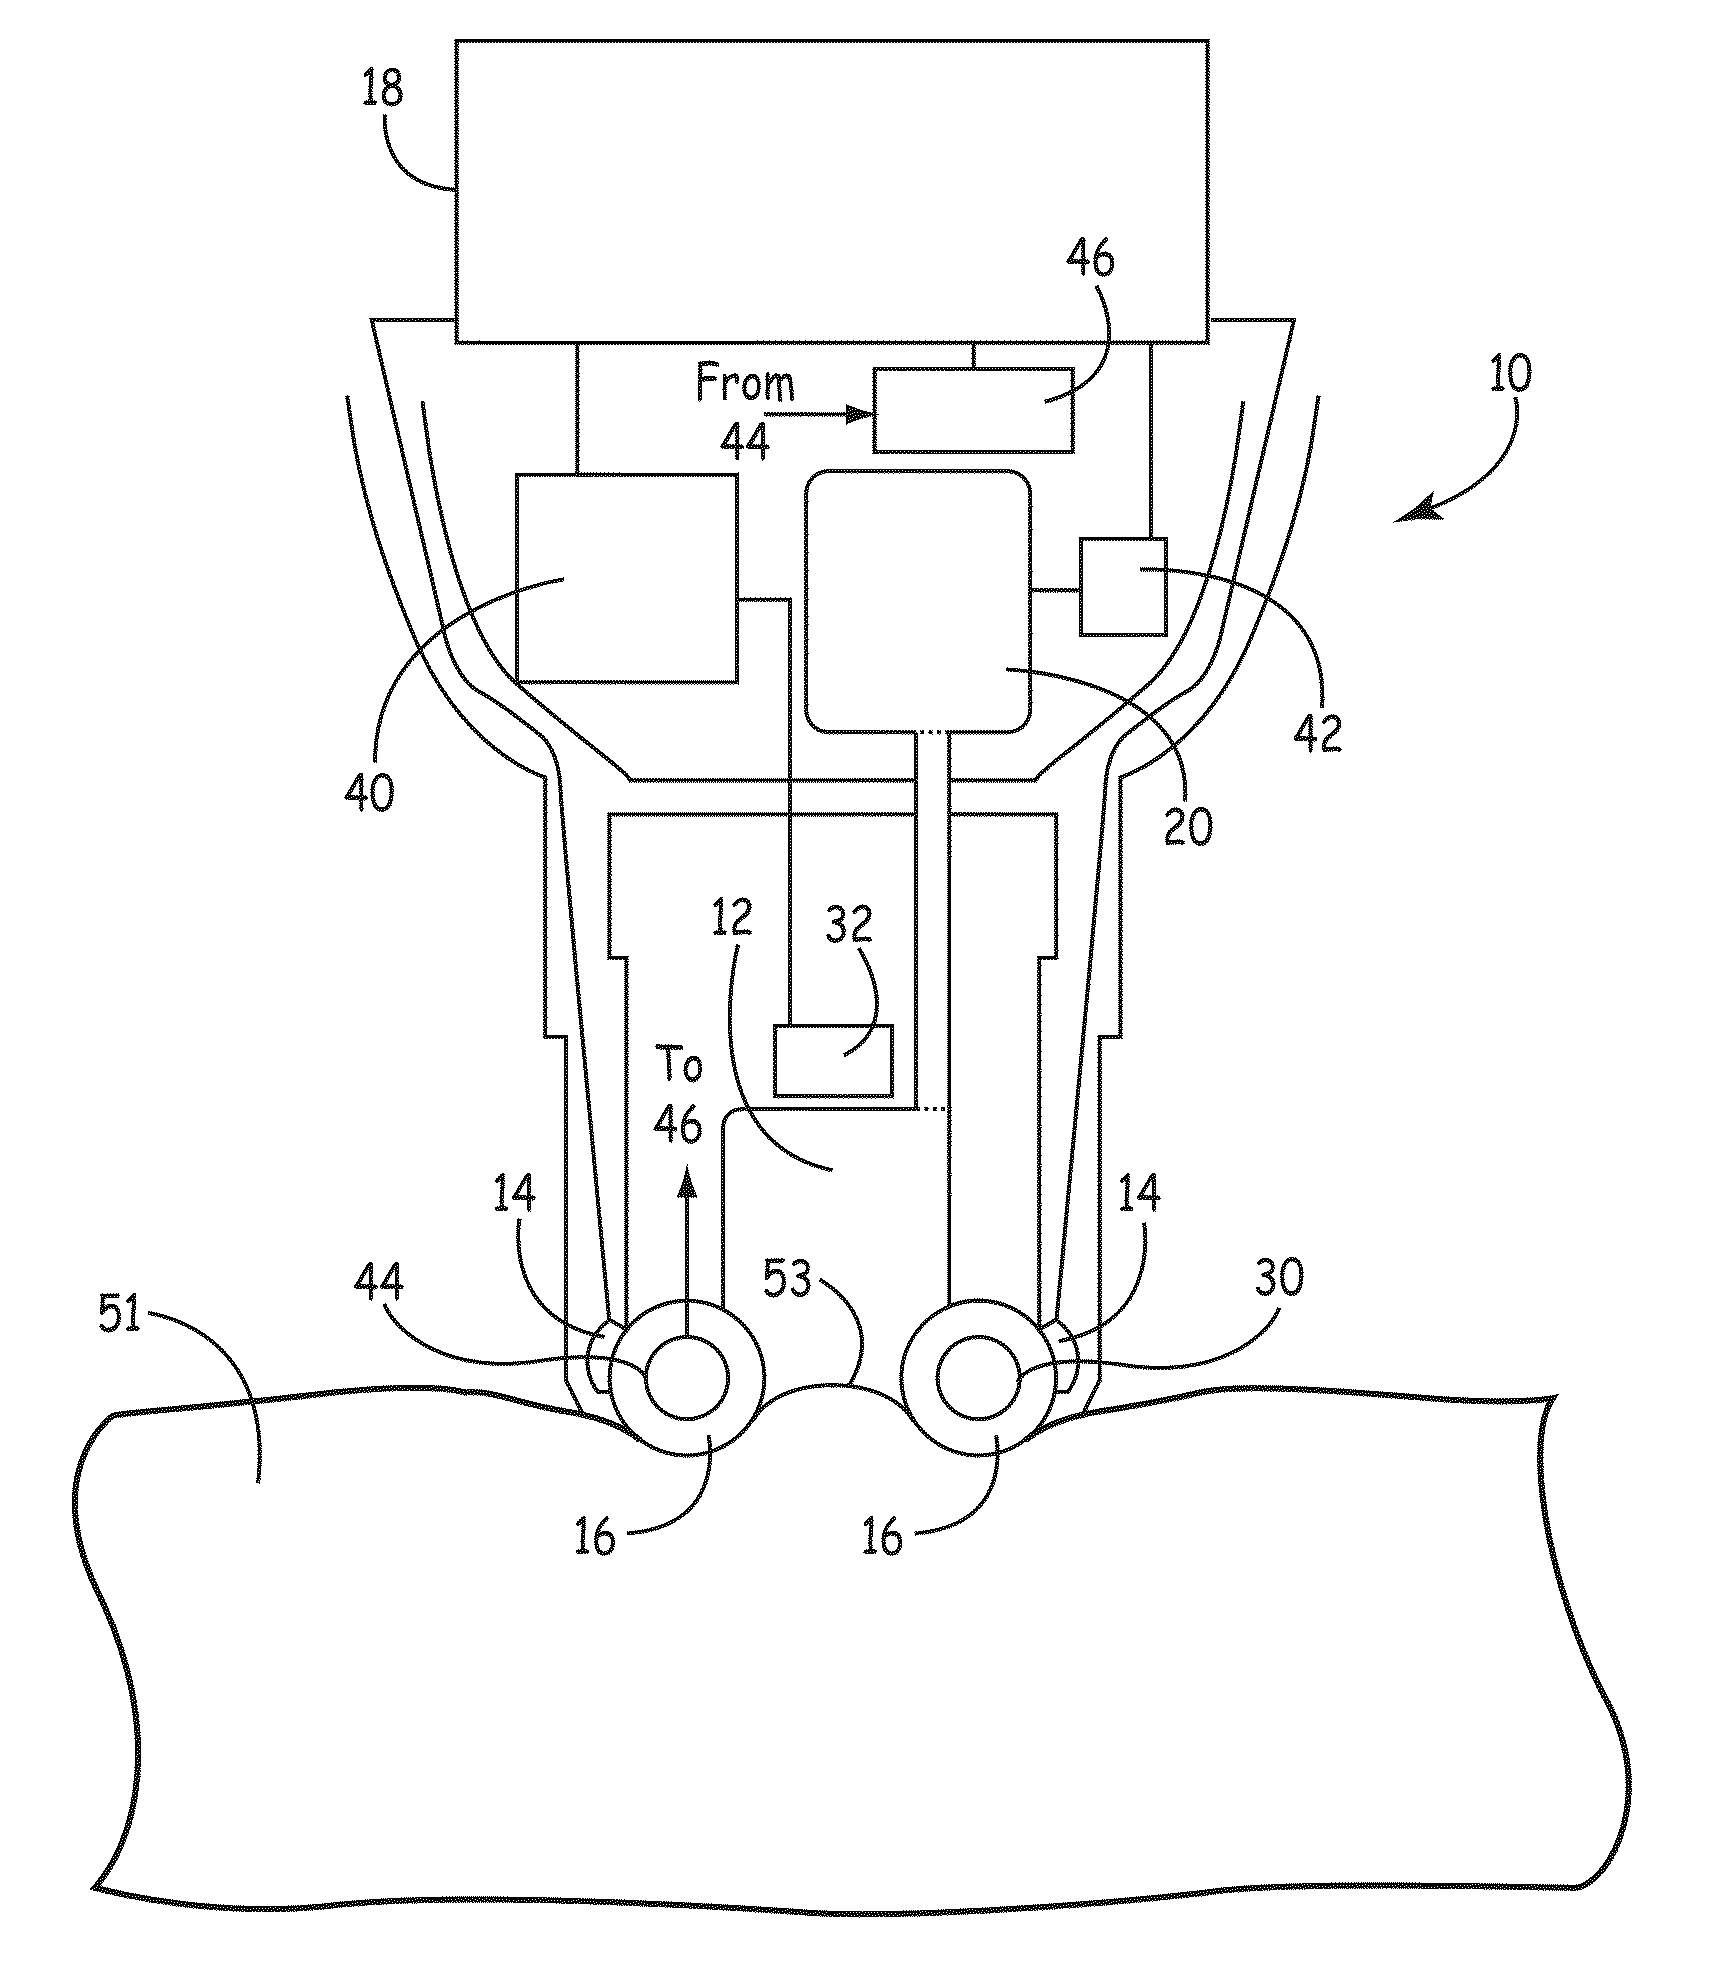 Apparatus and method for treating tissue